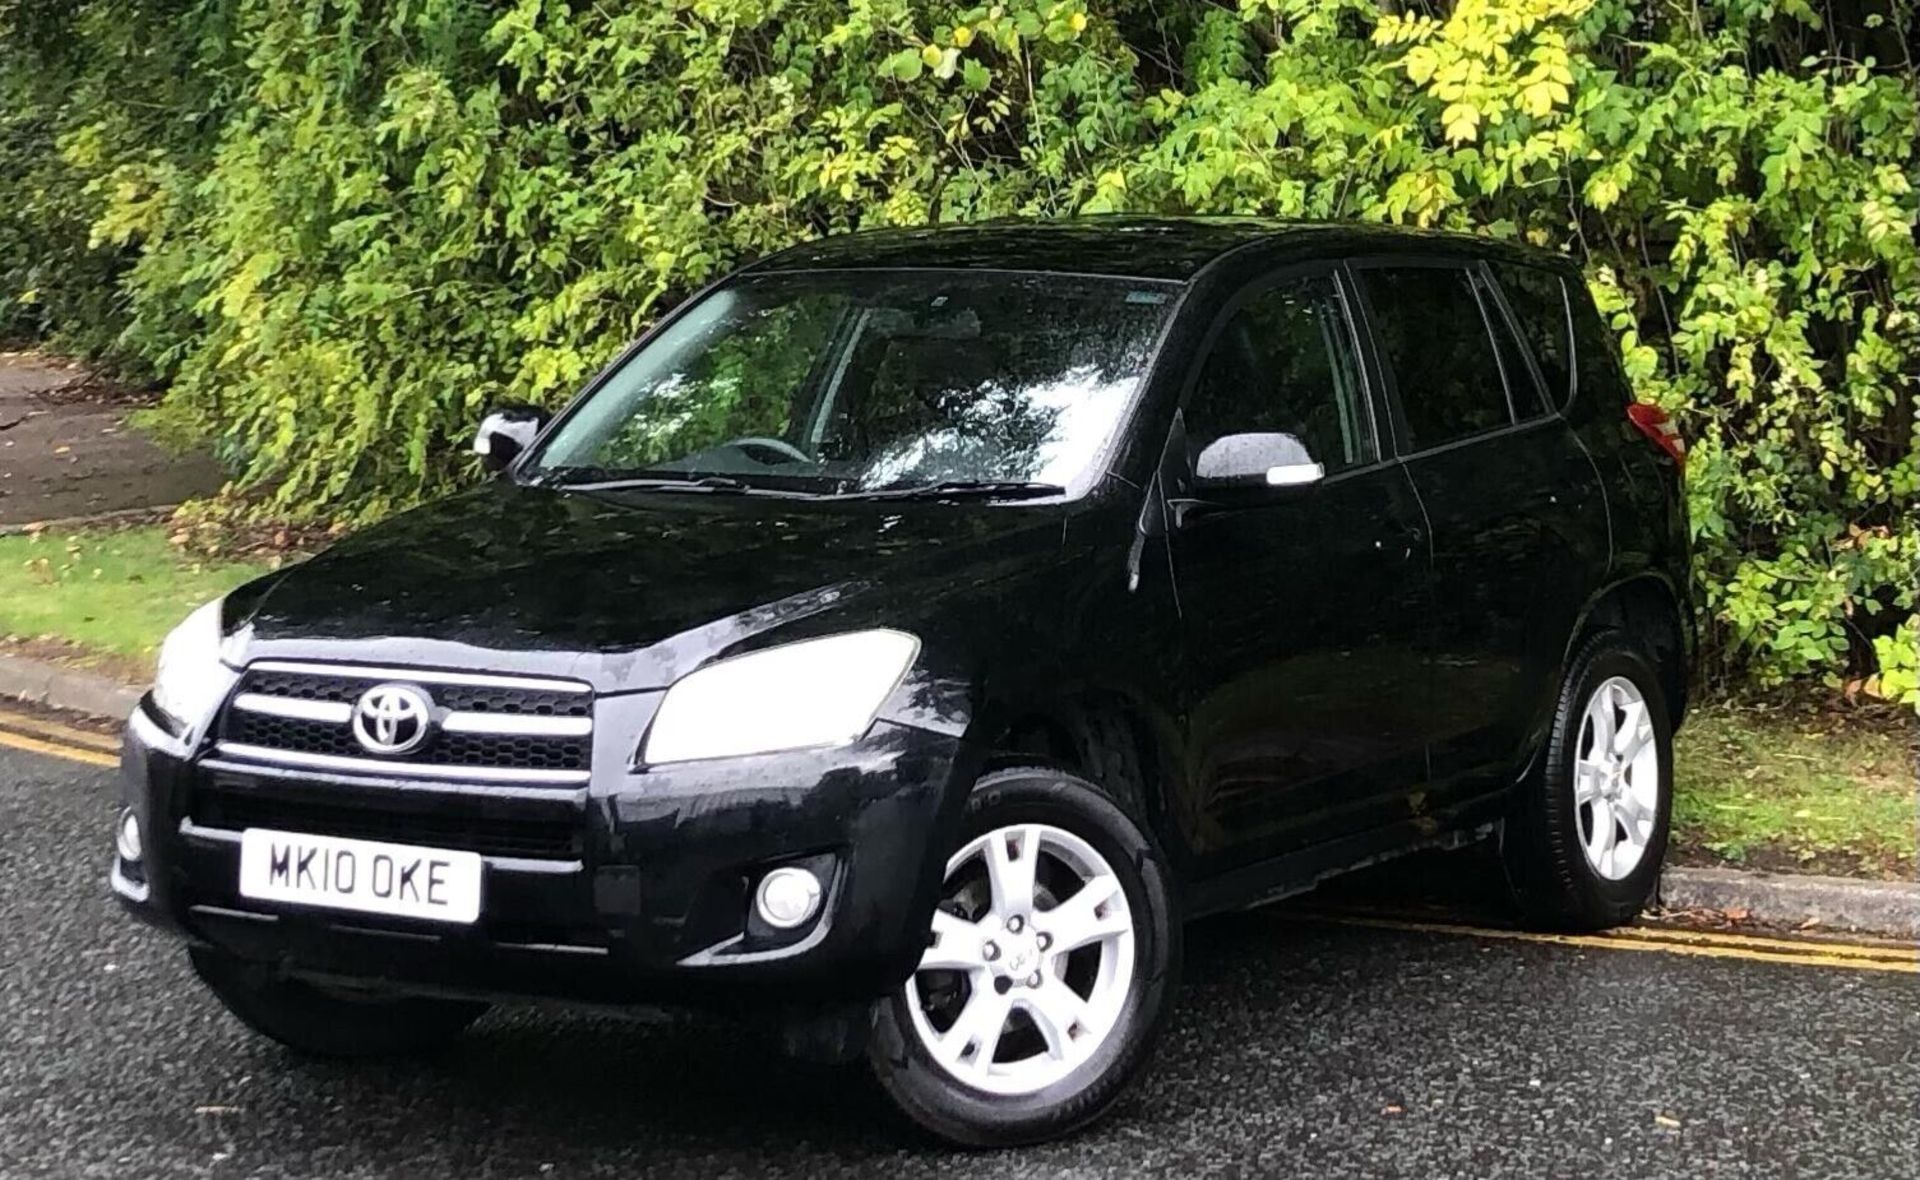 RELIABLE TOYOTA RAV4 2.2 D-4D XT-R: WELL-MAINTAINED 2010 MODEL - Image 3 of 14